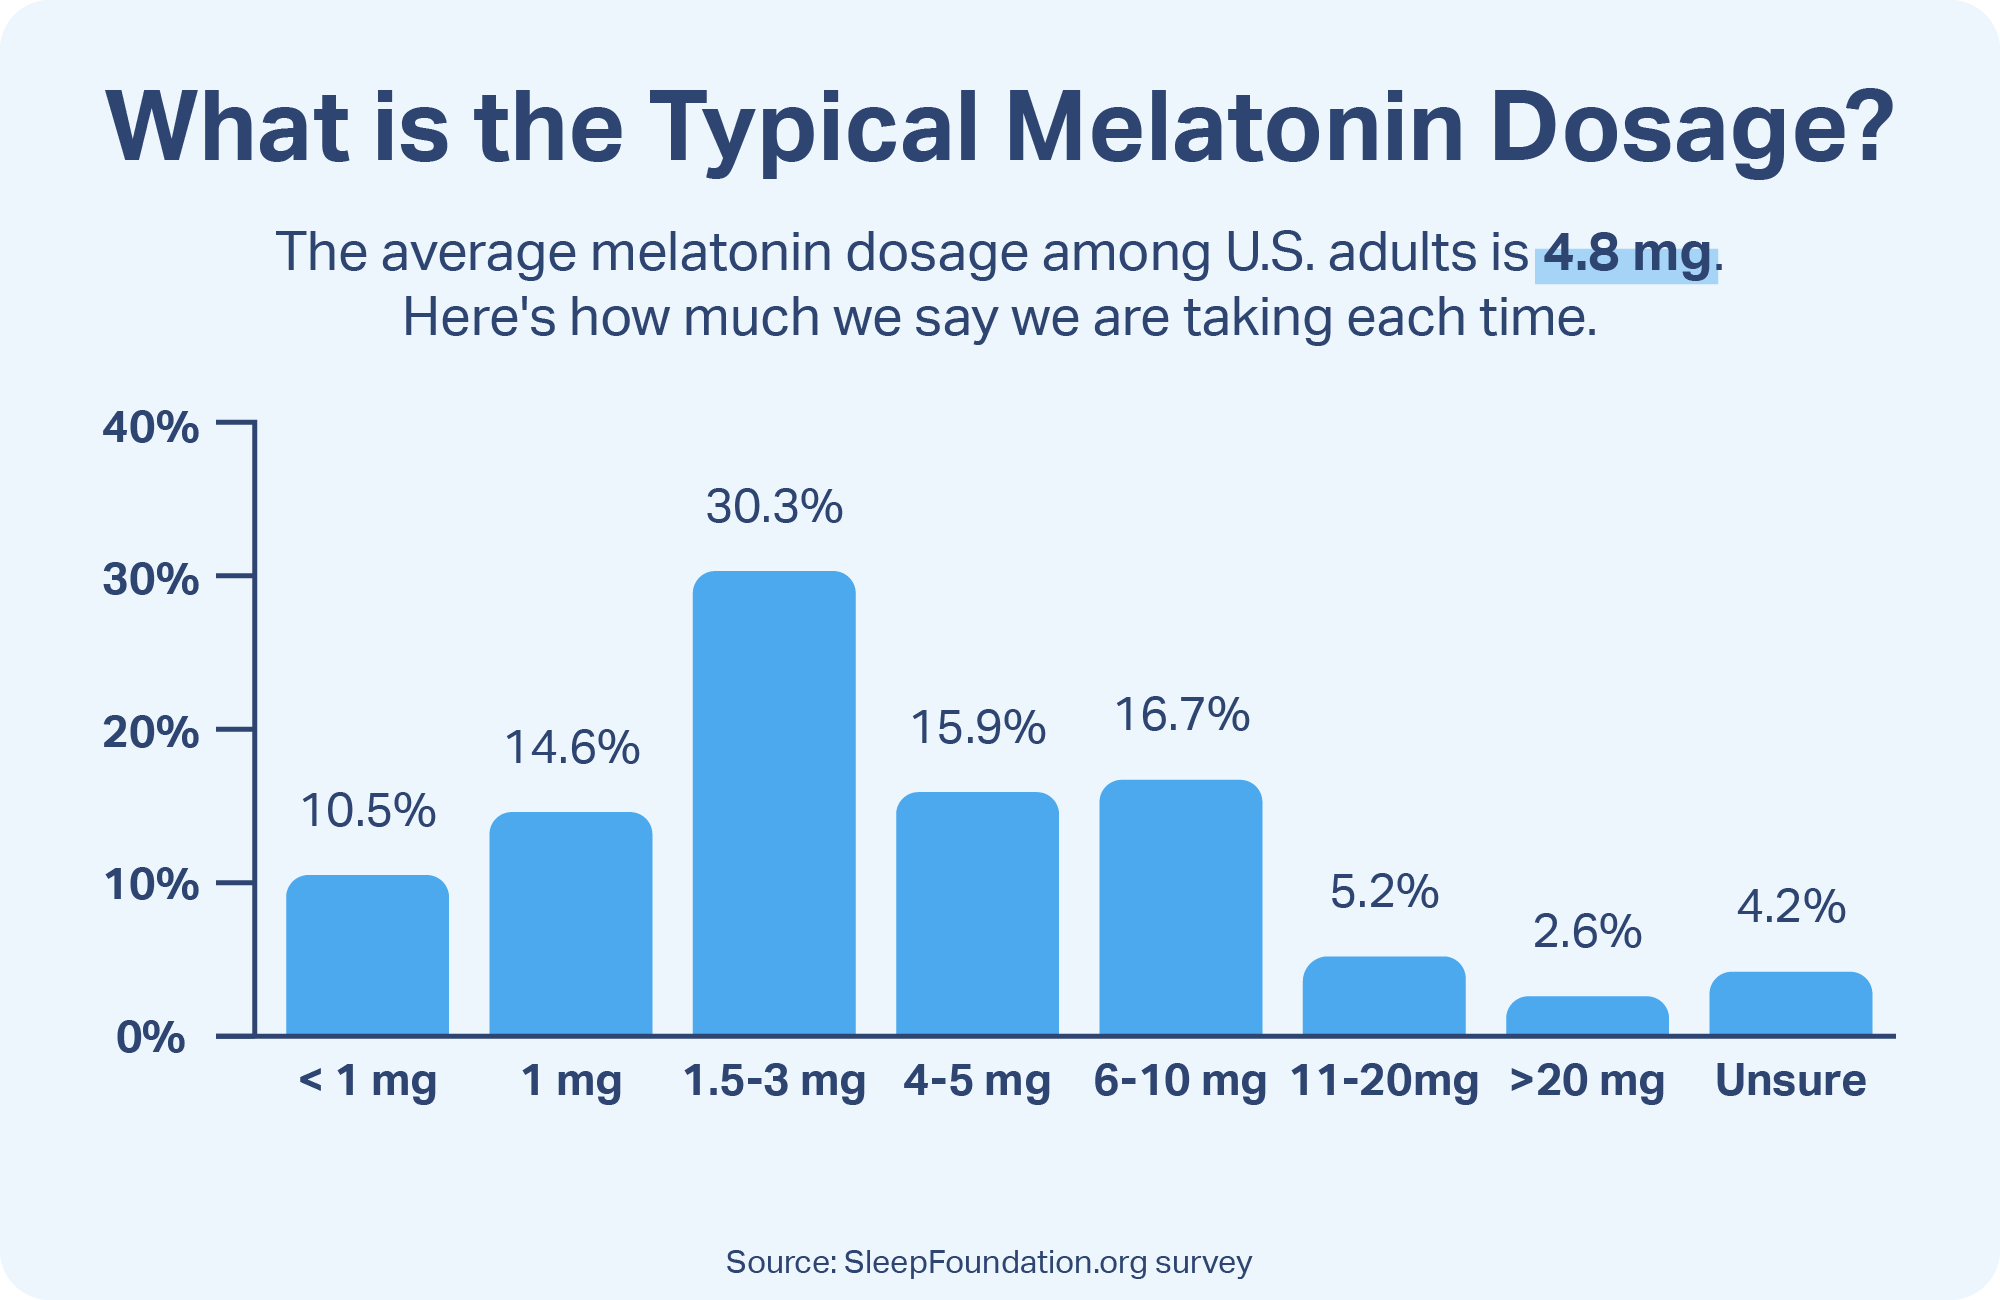 What is the Typical Melatonin Dosage?